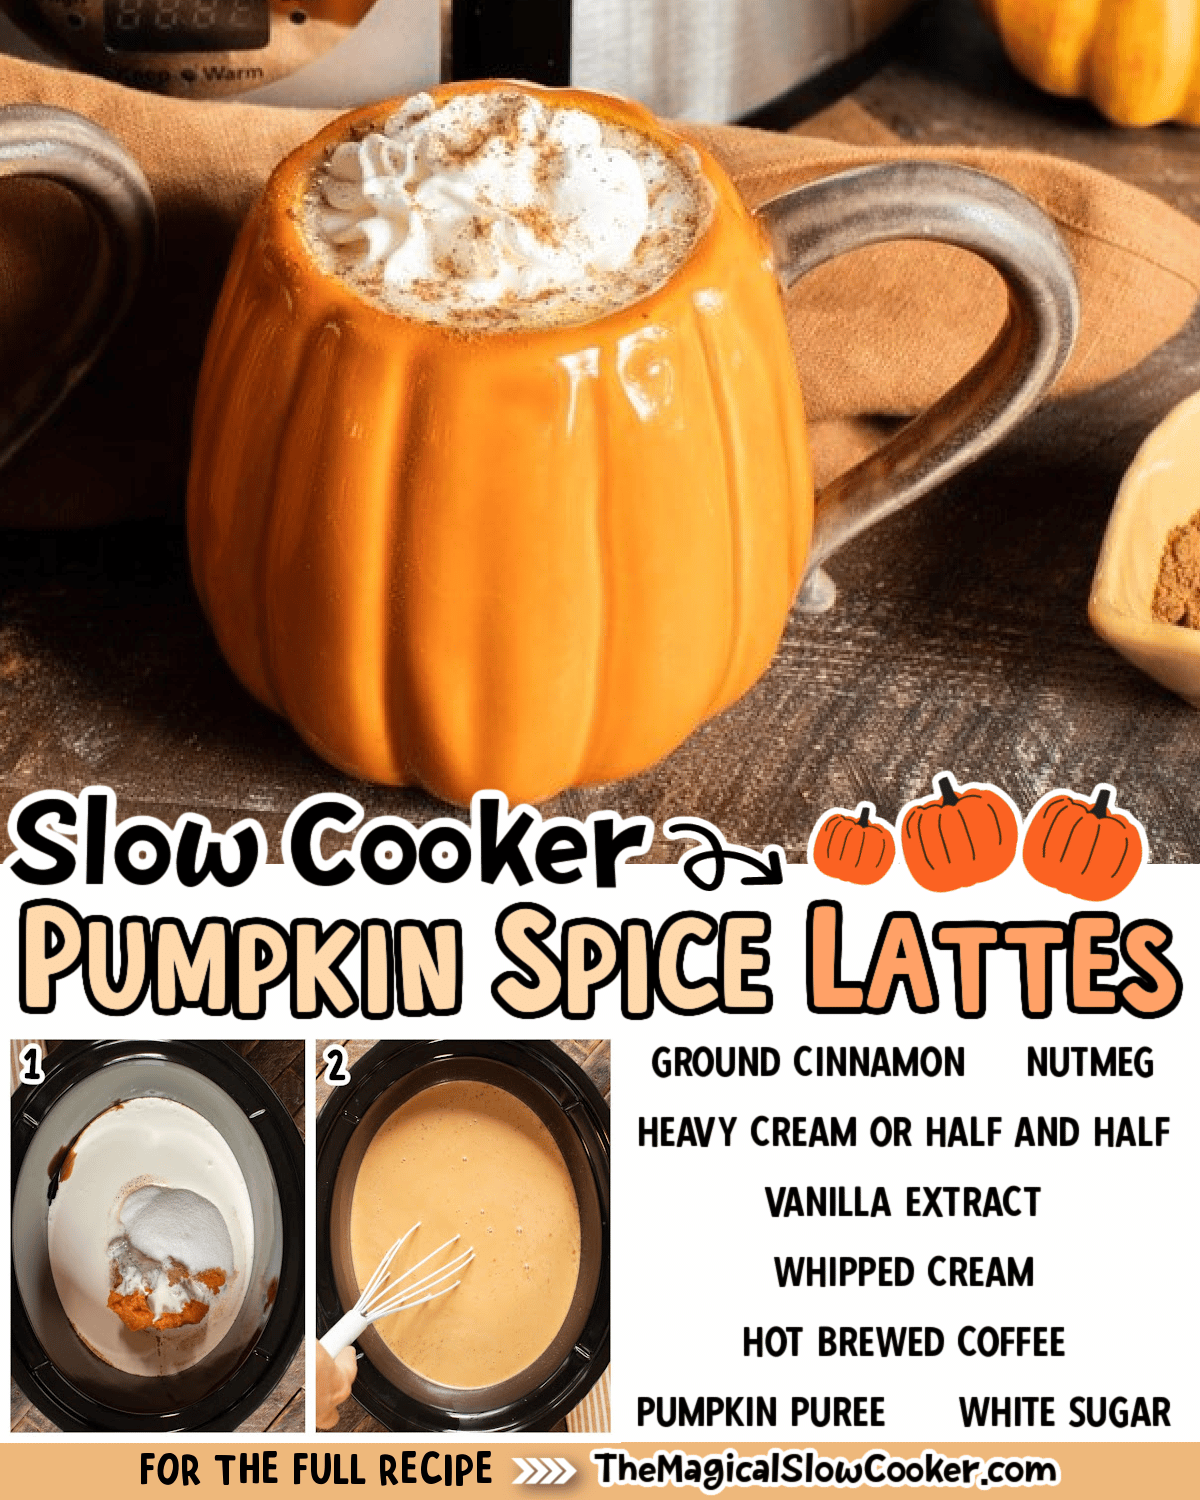 Collage of pumpkin spice latte images with text of ingredients.